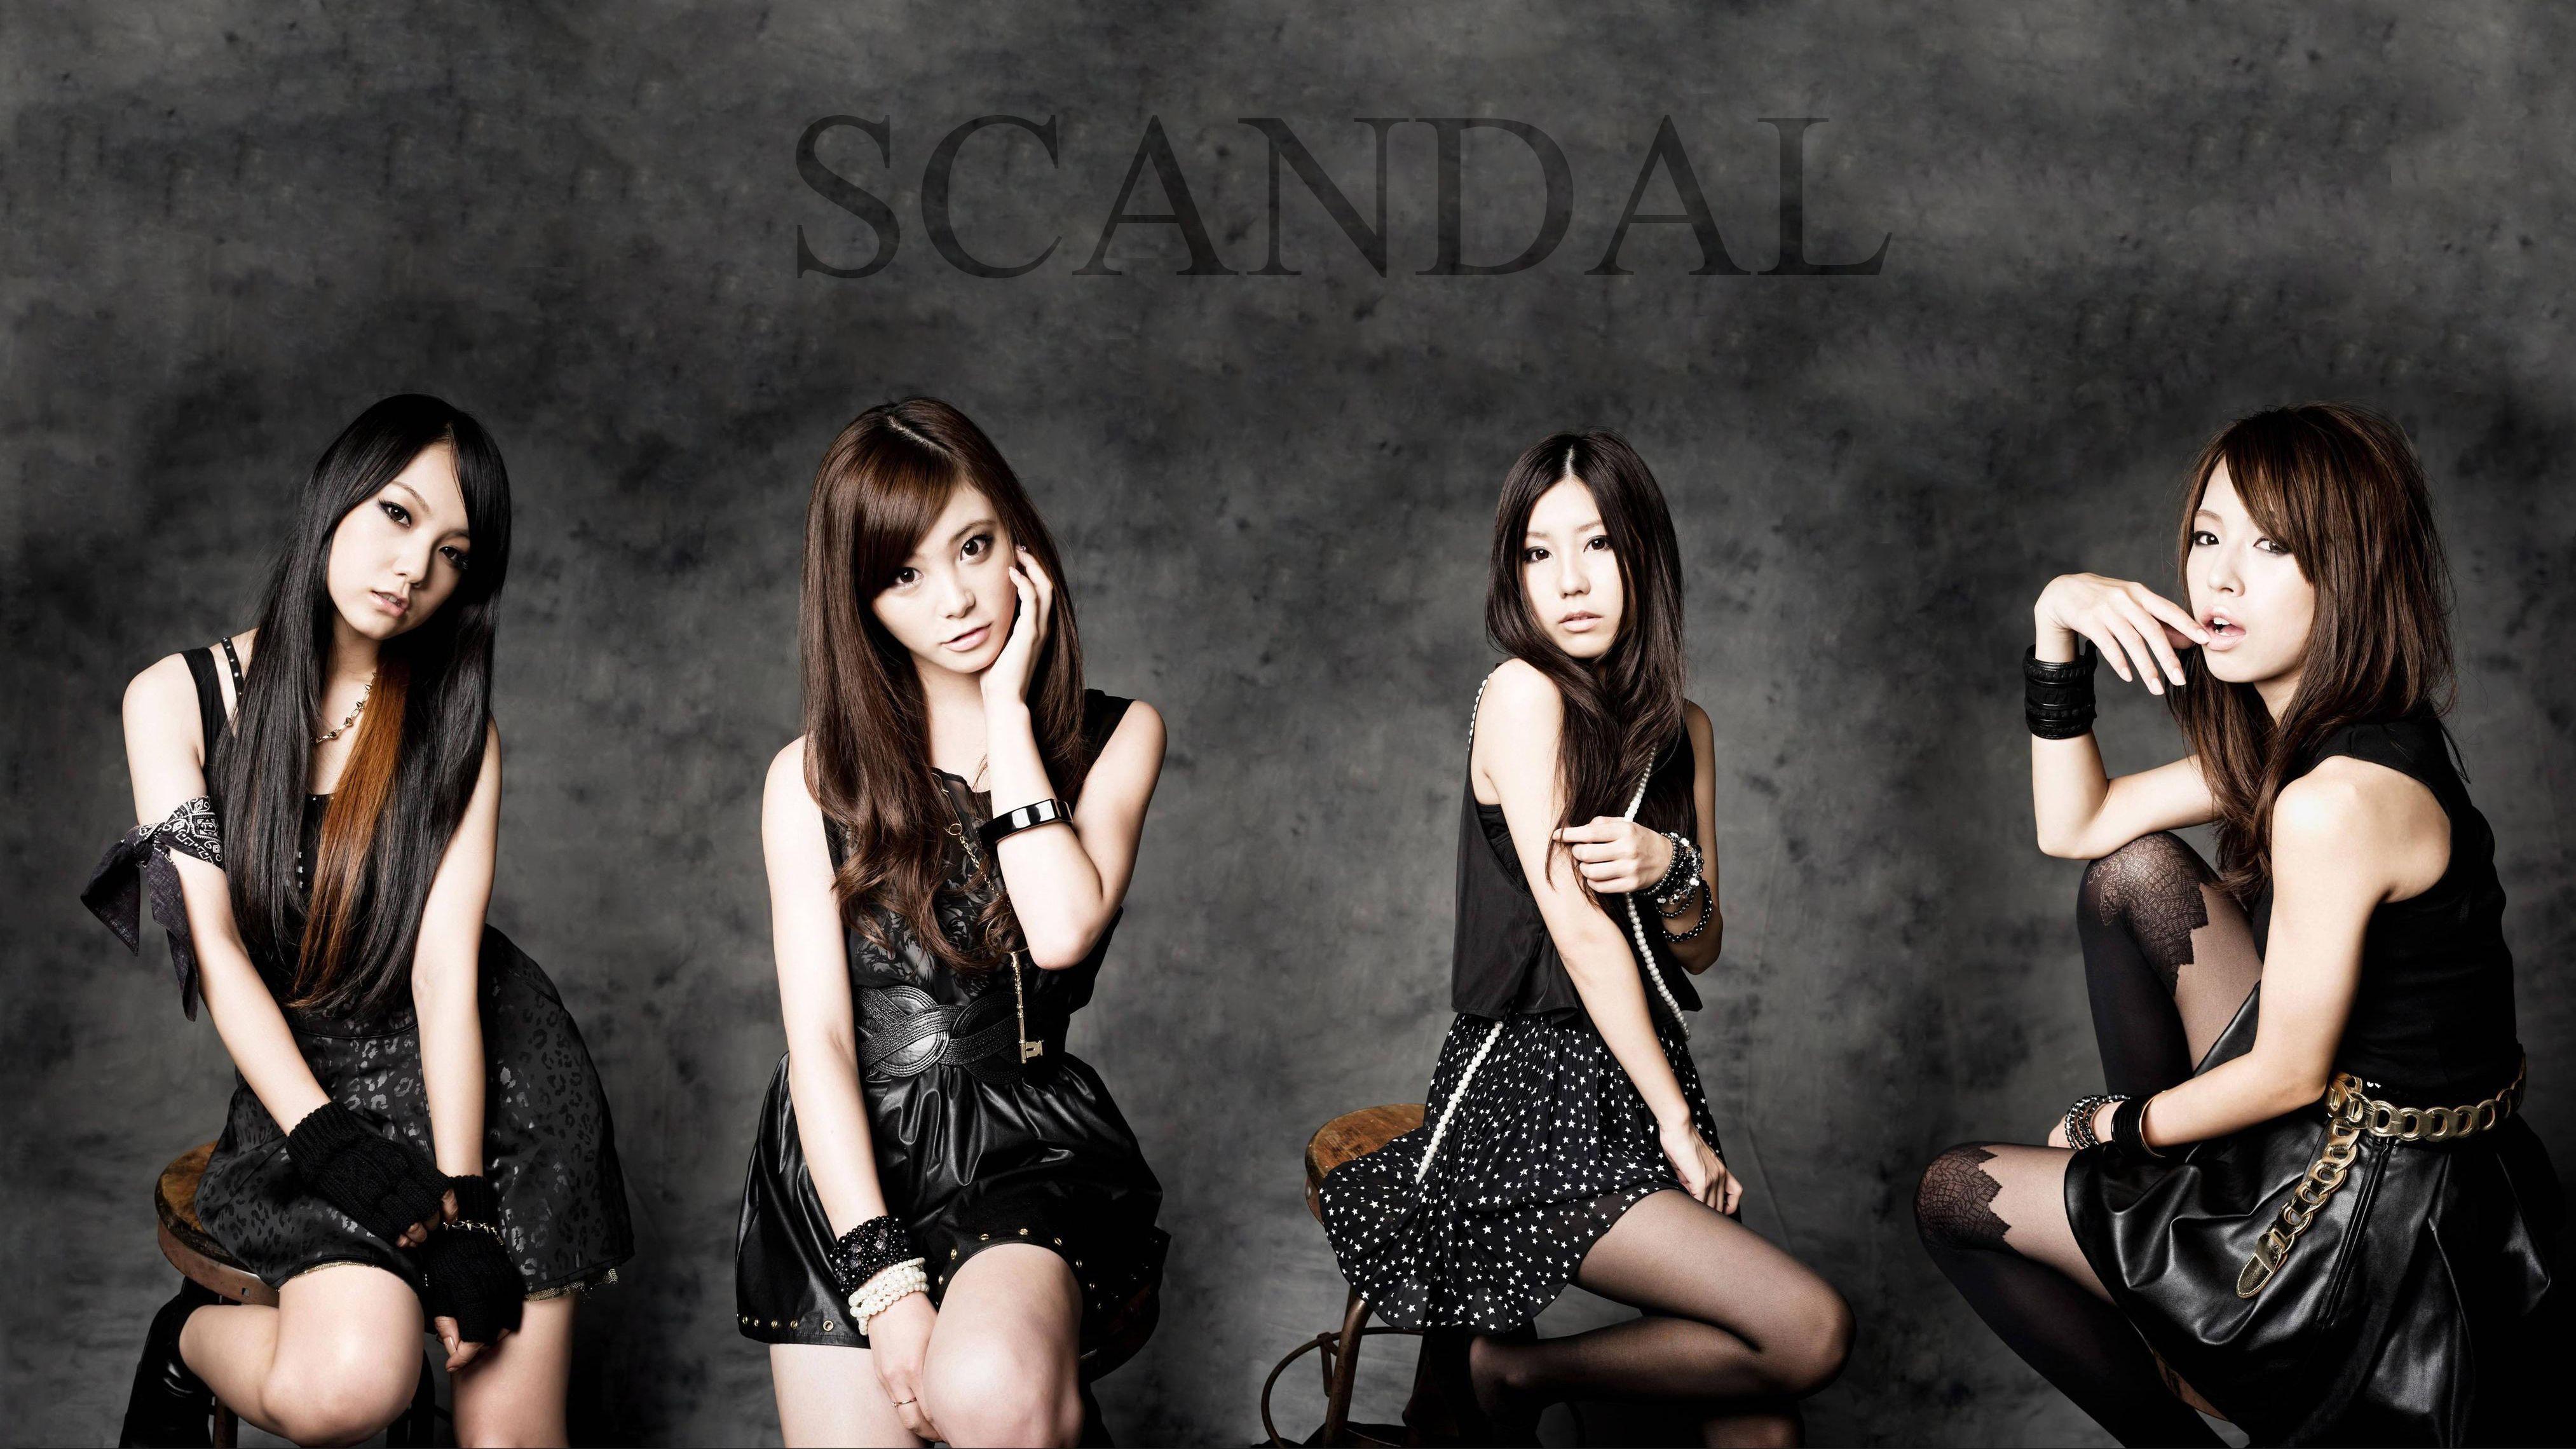 Scandal photos girls, ex wife and her girlfriend